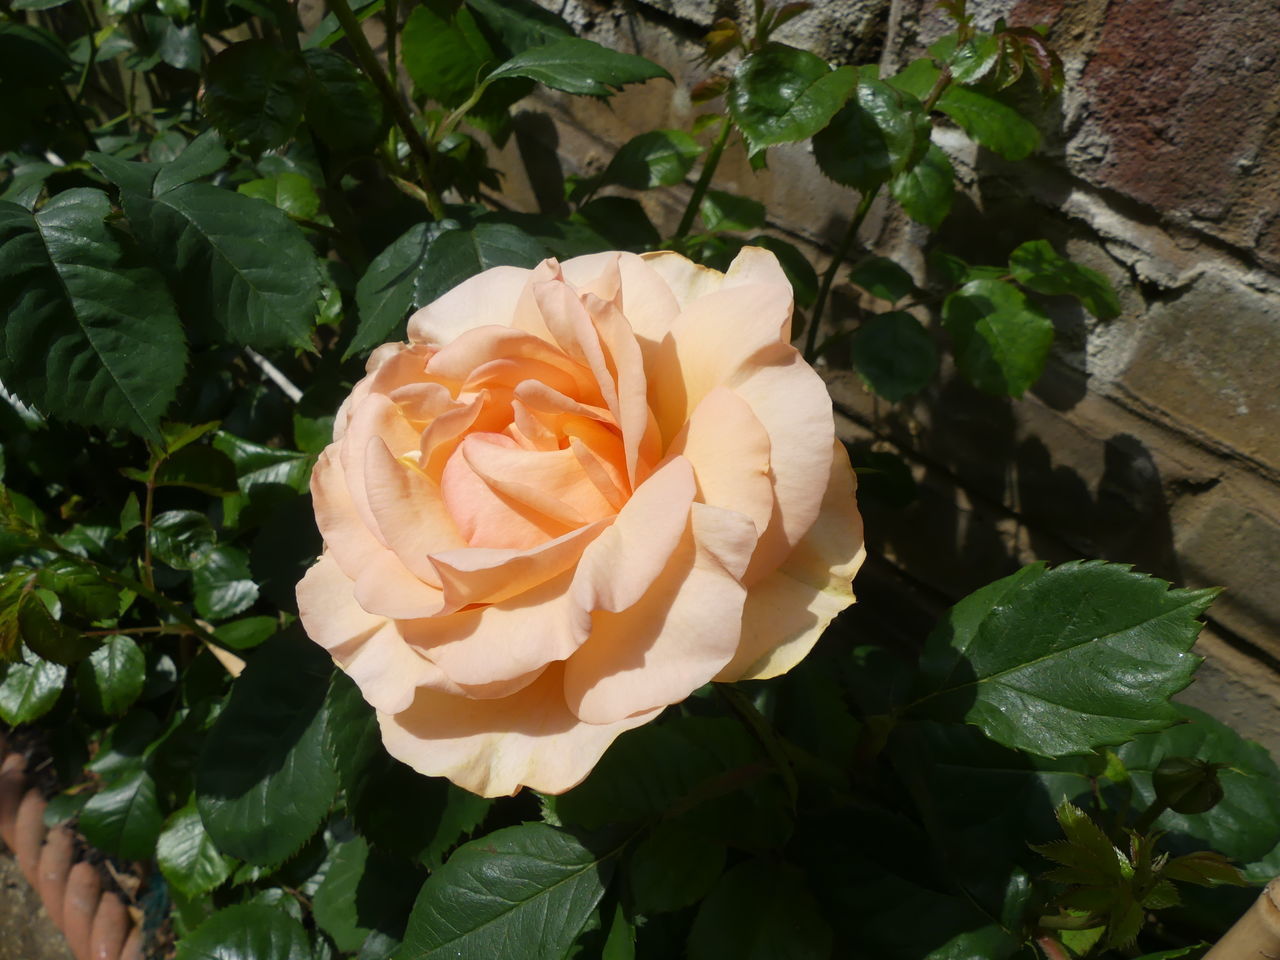 HIGH ANGLE VIEW OF ROSE ROSES ON PLANT